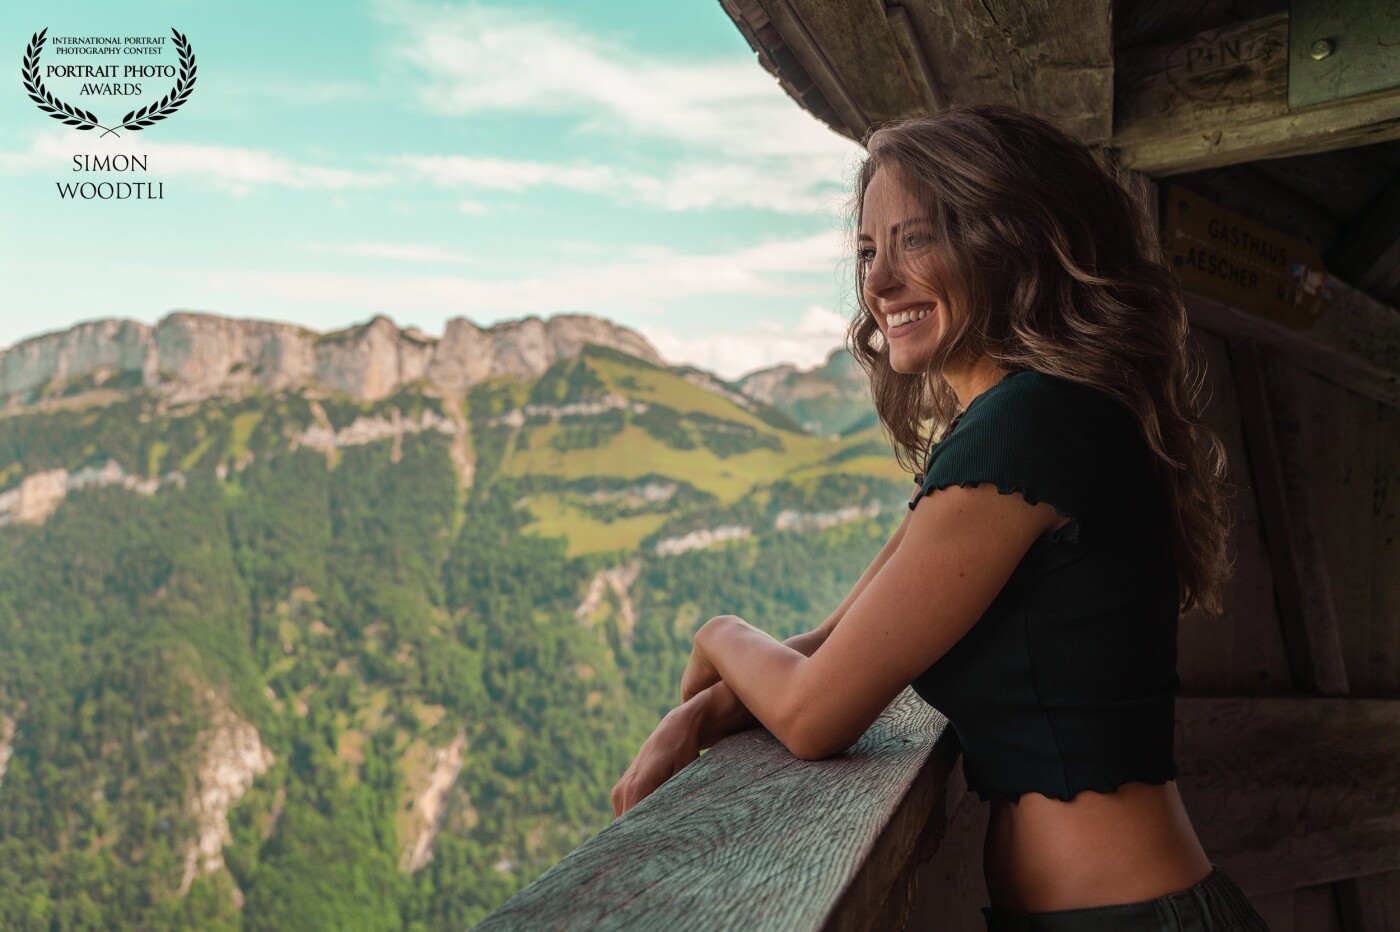 We took the whole day for this shoot. We drove to different locations and finally we visited the beautiful Ebenalp in Switzerland. An absolute dream backdrop for a photo shoot. Many thanks to Stefanie for this wonderful, eventful day.